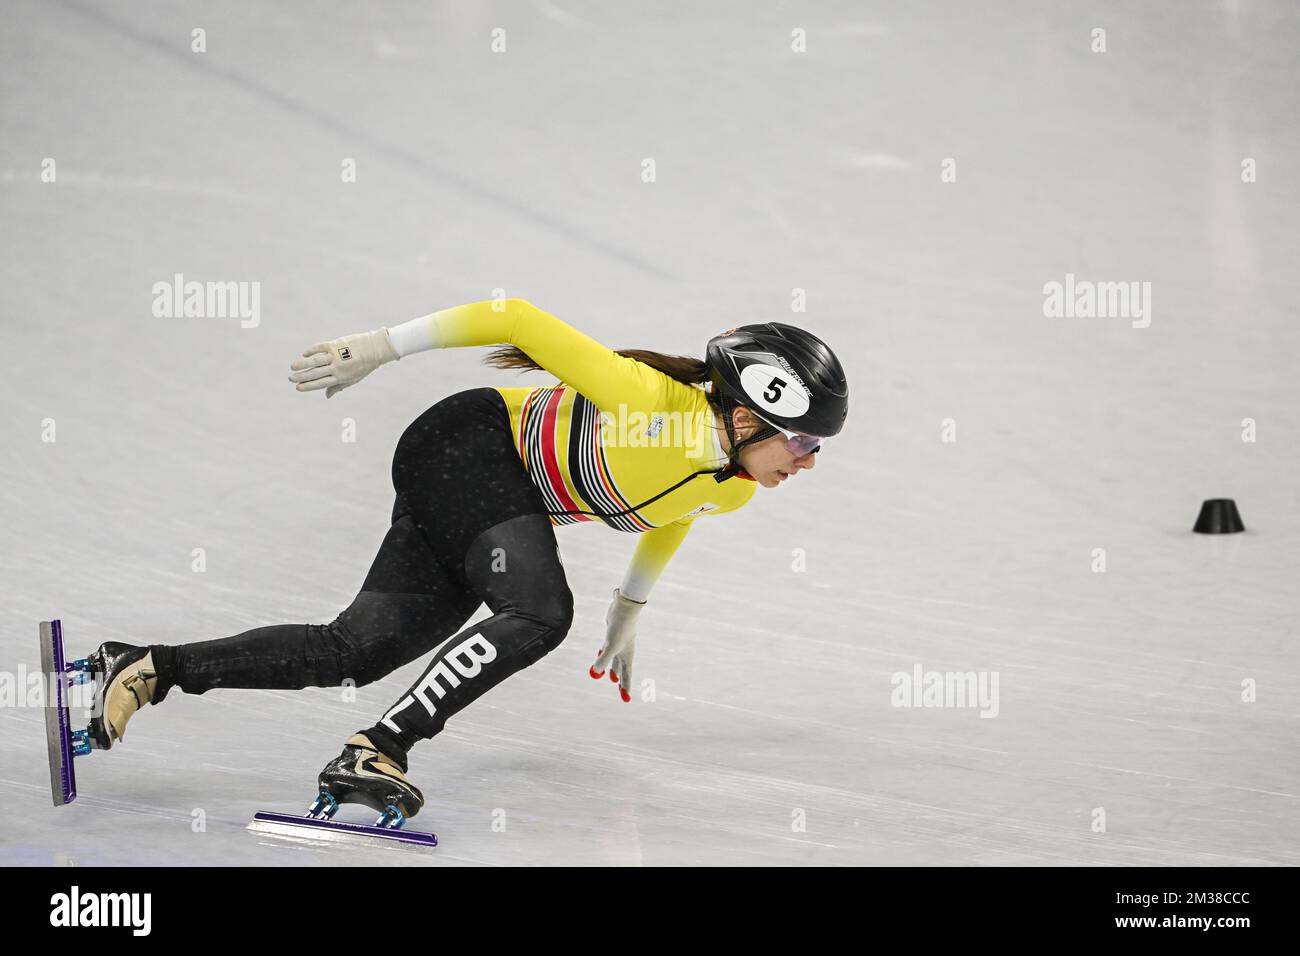 Belgian shorttrack skater Hanne Desmet pictured in action during the women's Shorttrack 1500m A-final at the Beijing 2022 Winter Olympics in Beijing, China, Wednesday 16 February 2022. The winter Olympics are taking place from 4 February to 20 February 2022. BELGA PHOTO LAURIE DIEFFEMBACQ Stock Photo